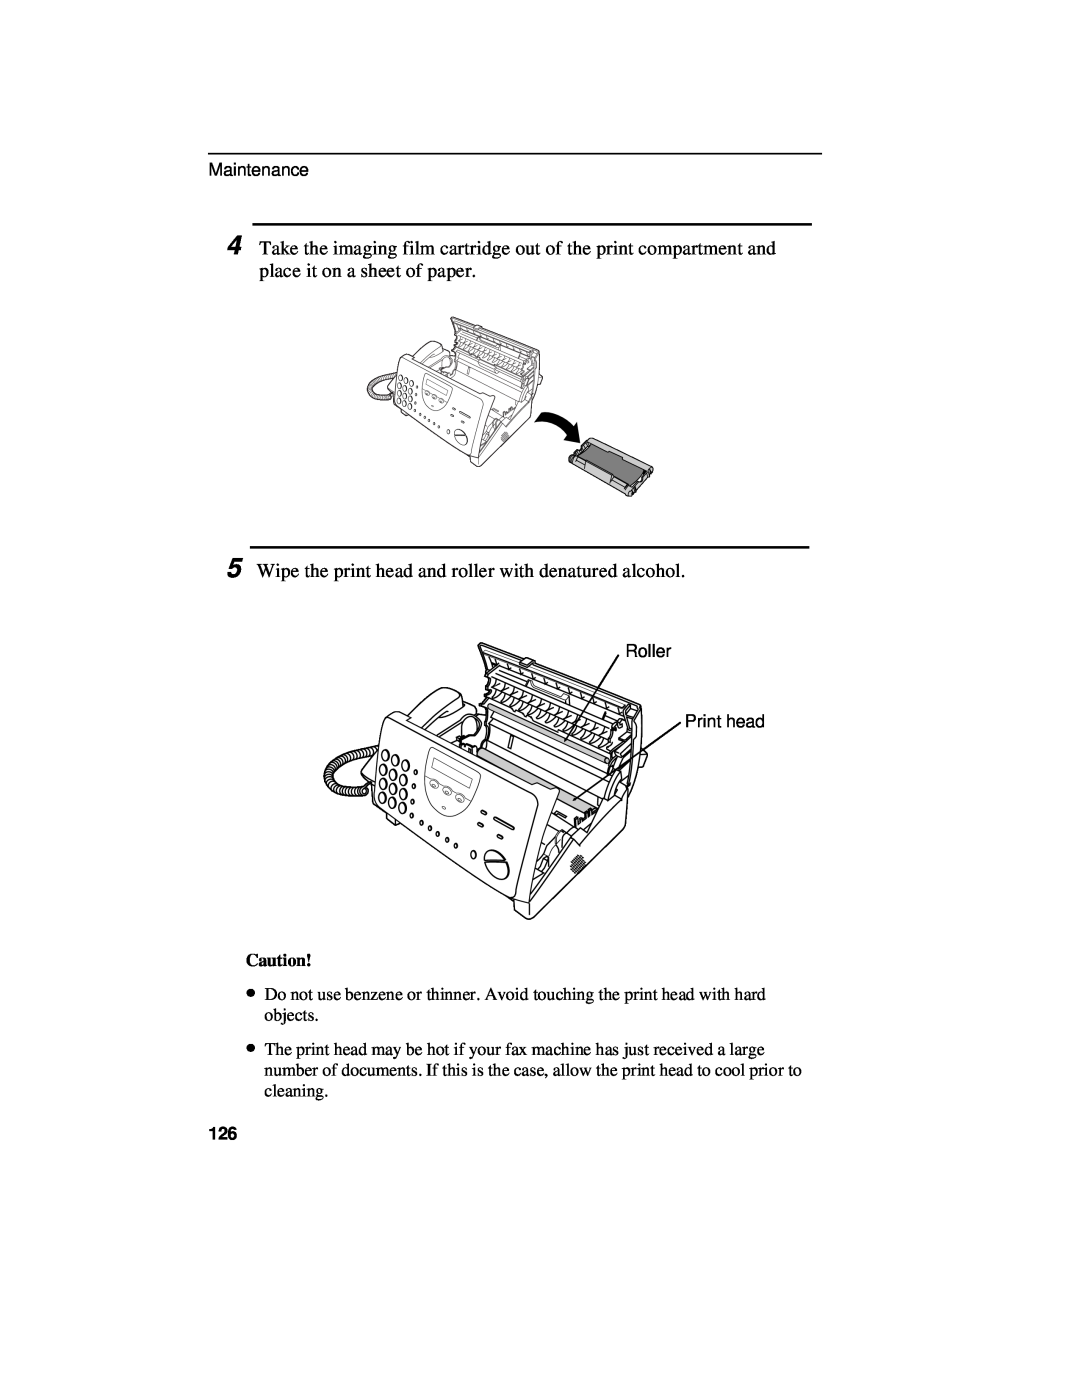 Sharp UX-460 operation manual Wipe the print head and roller with denatured alcohol, Maintenance, Roller Print head 